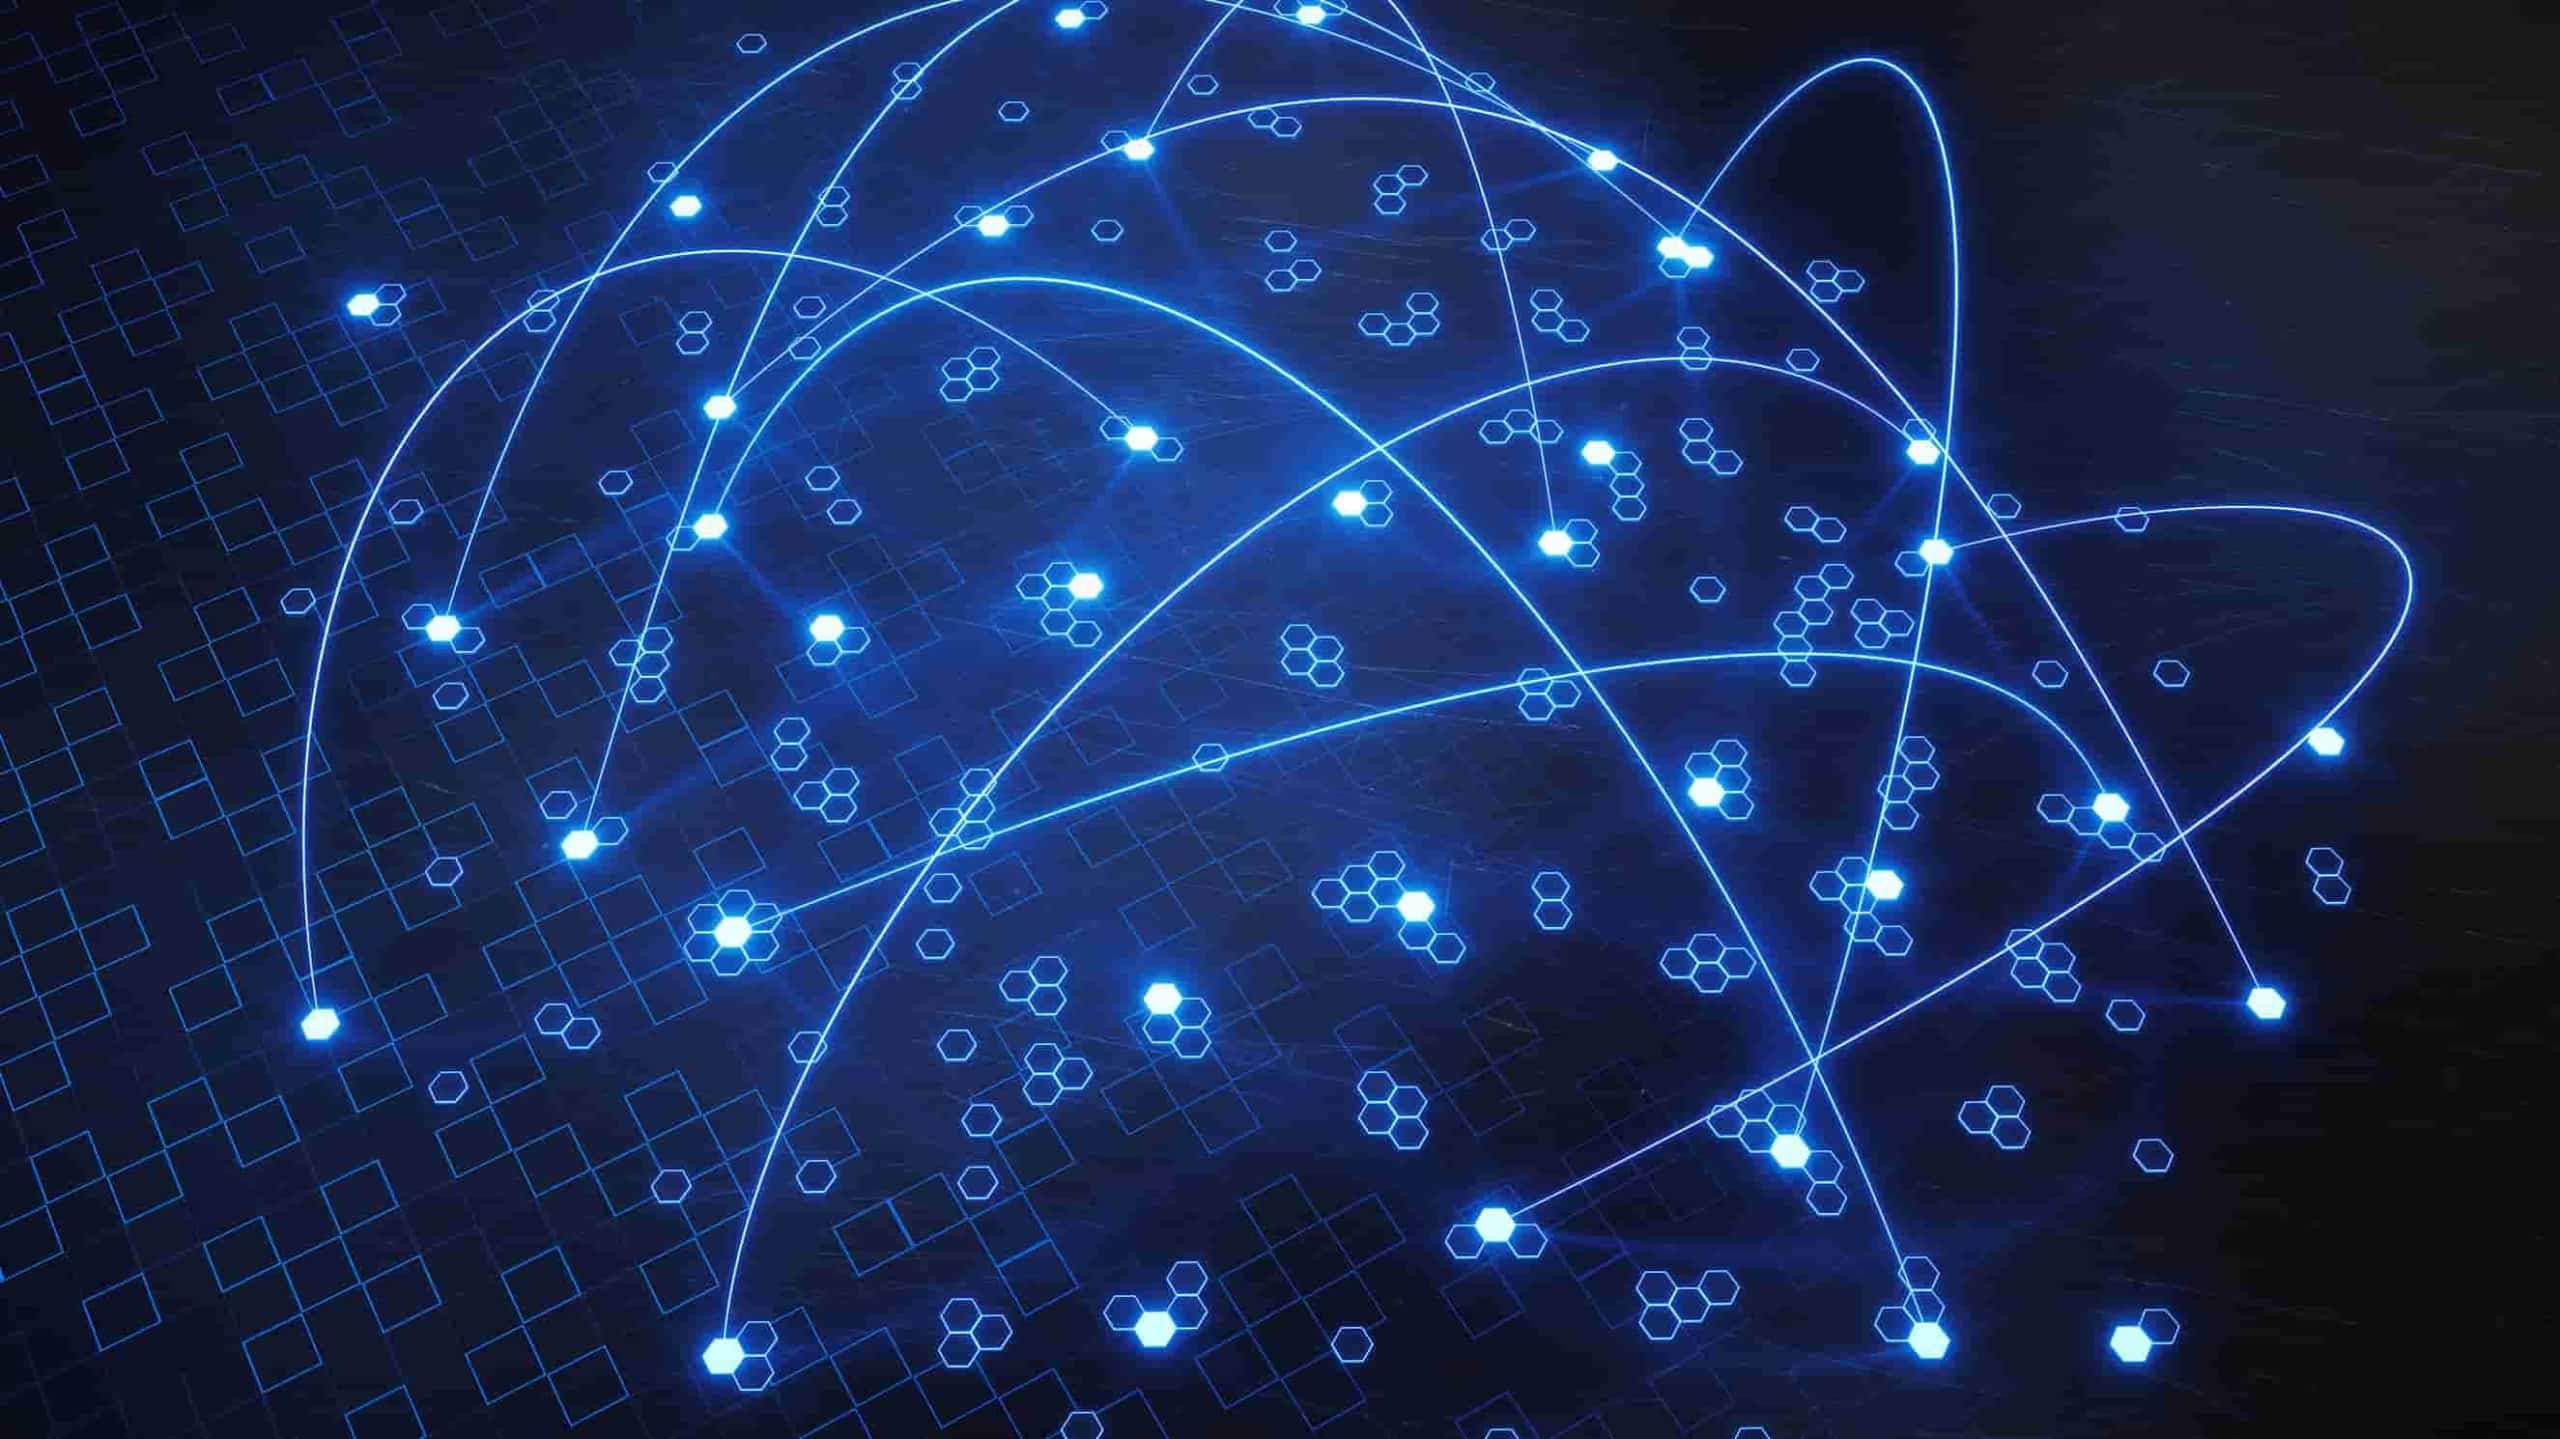 A digital illustration of a network with interconnected nodes and lines on a dark background with a grid, symbolizing technology and data connectivity.